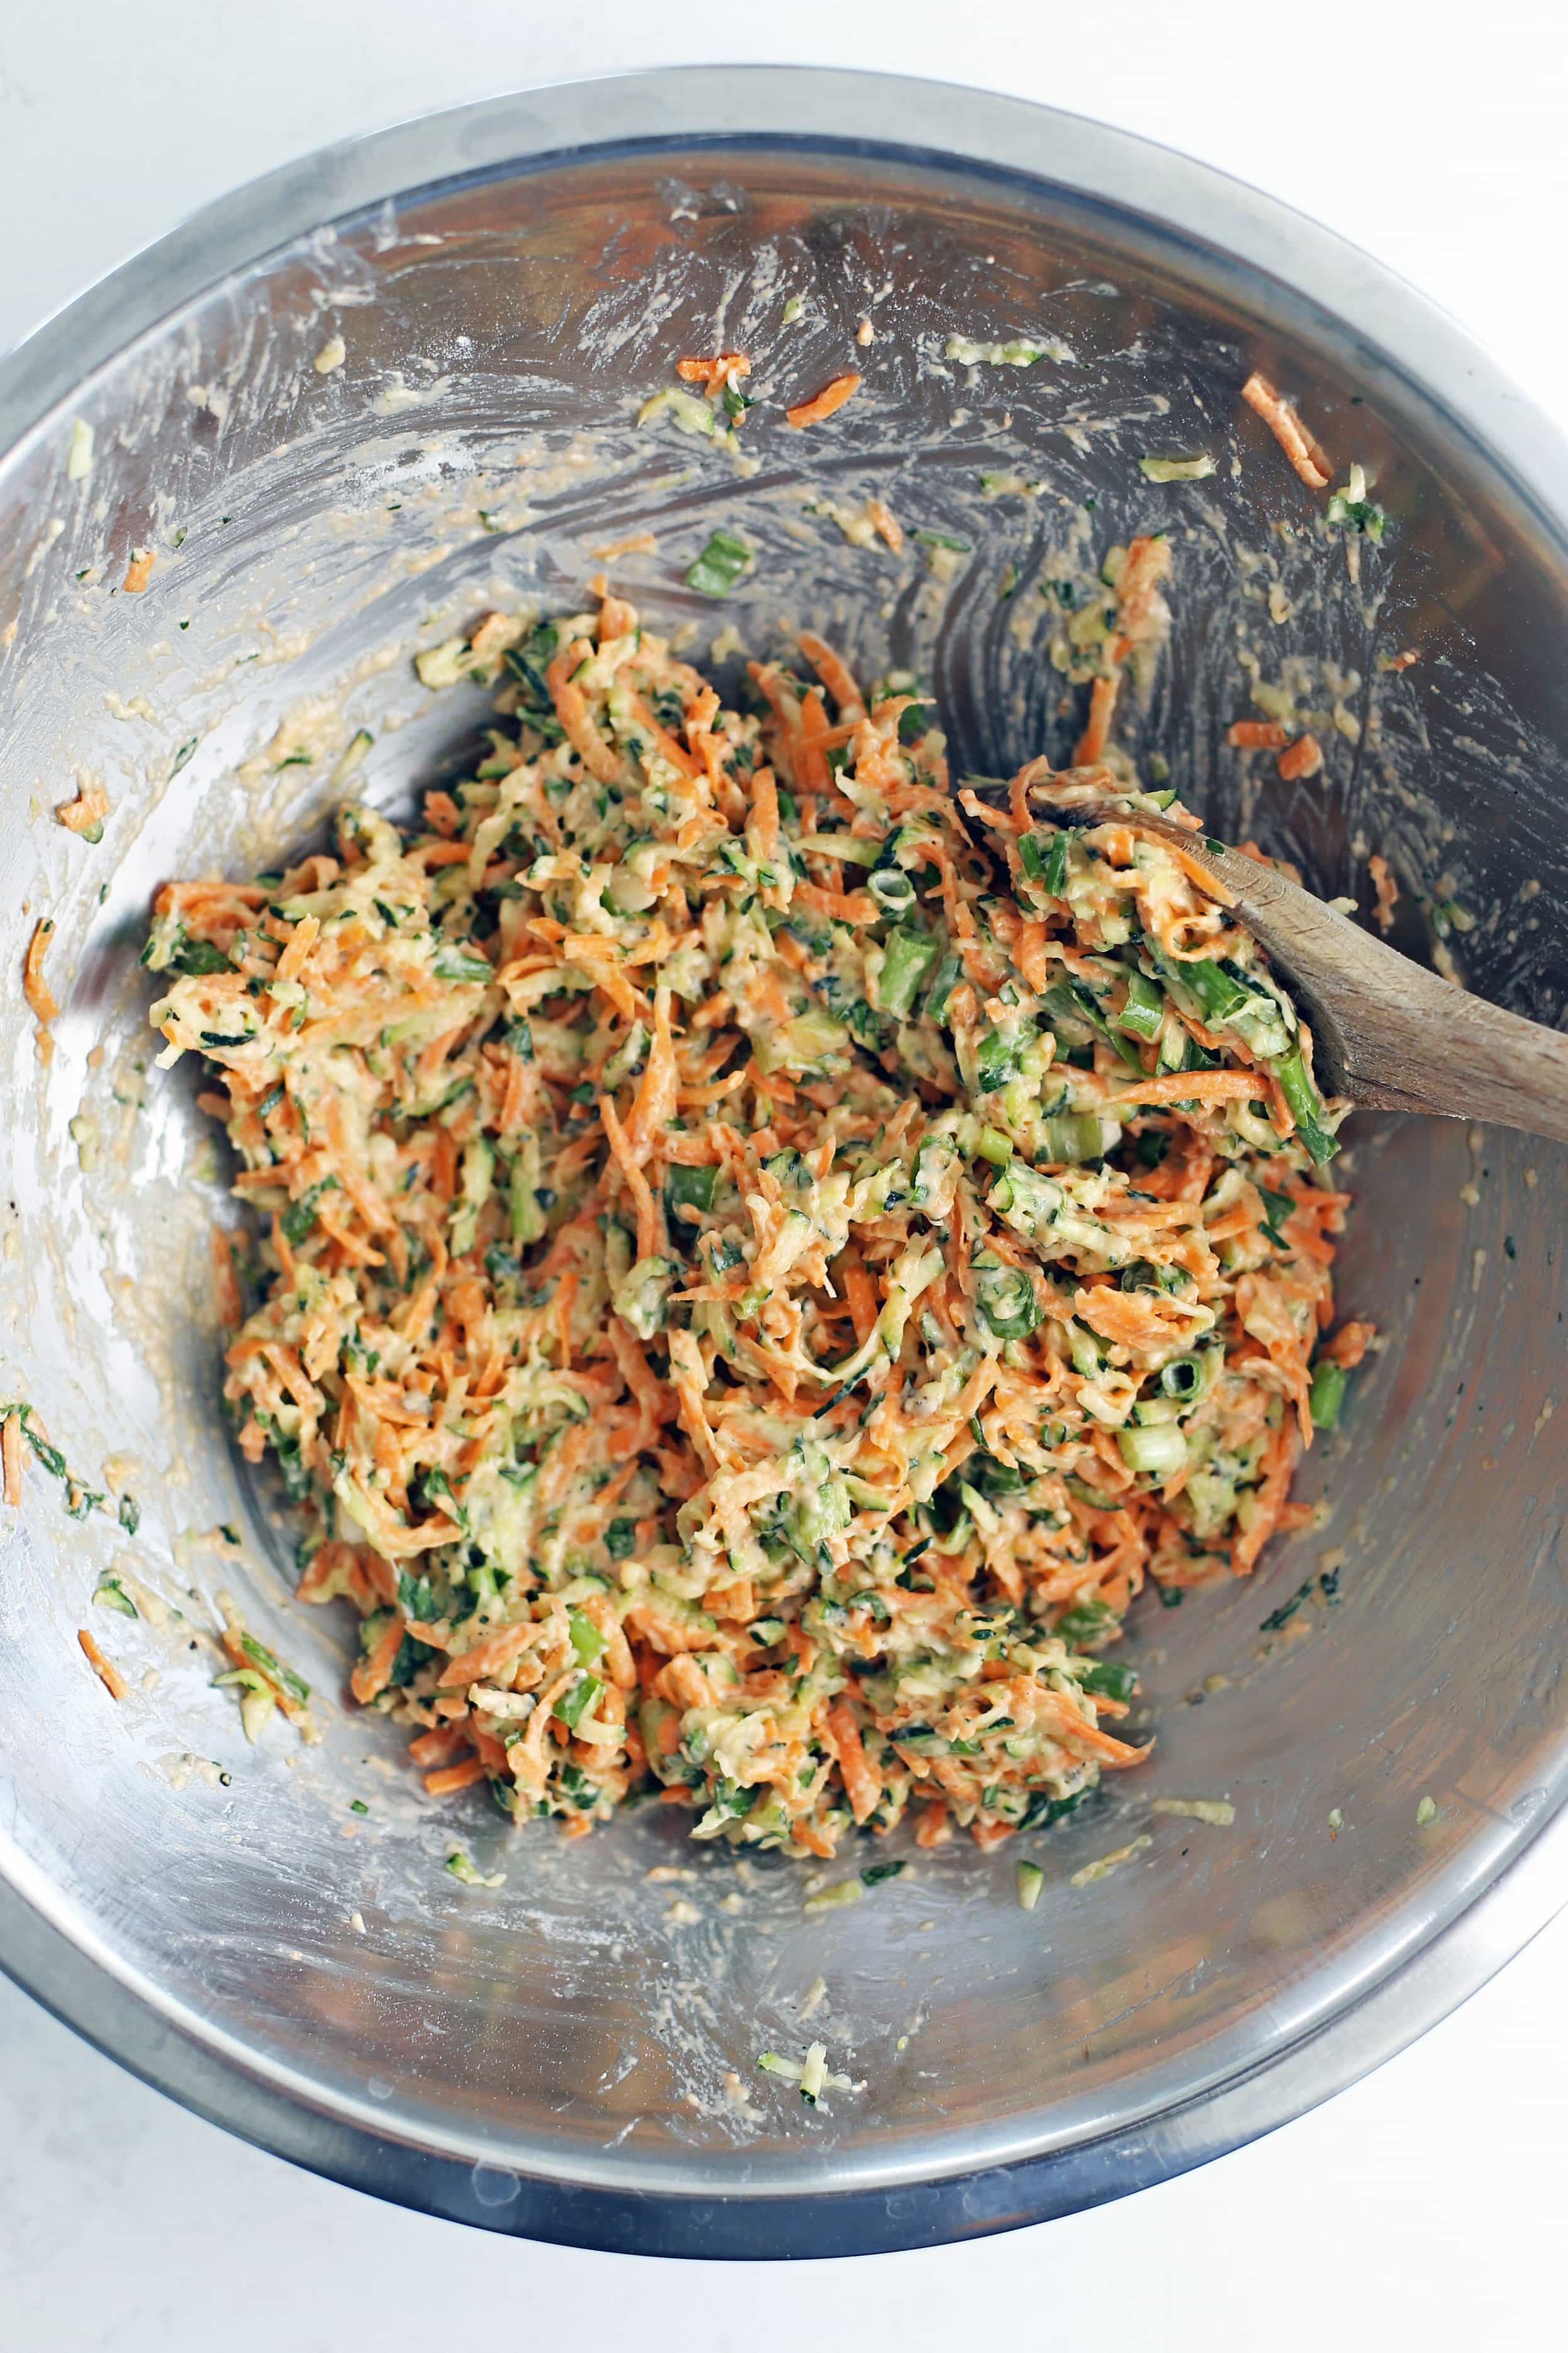 Zucchini carrot pancake ingredients combined together in a stainless steel bowl.